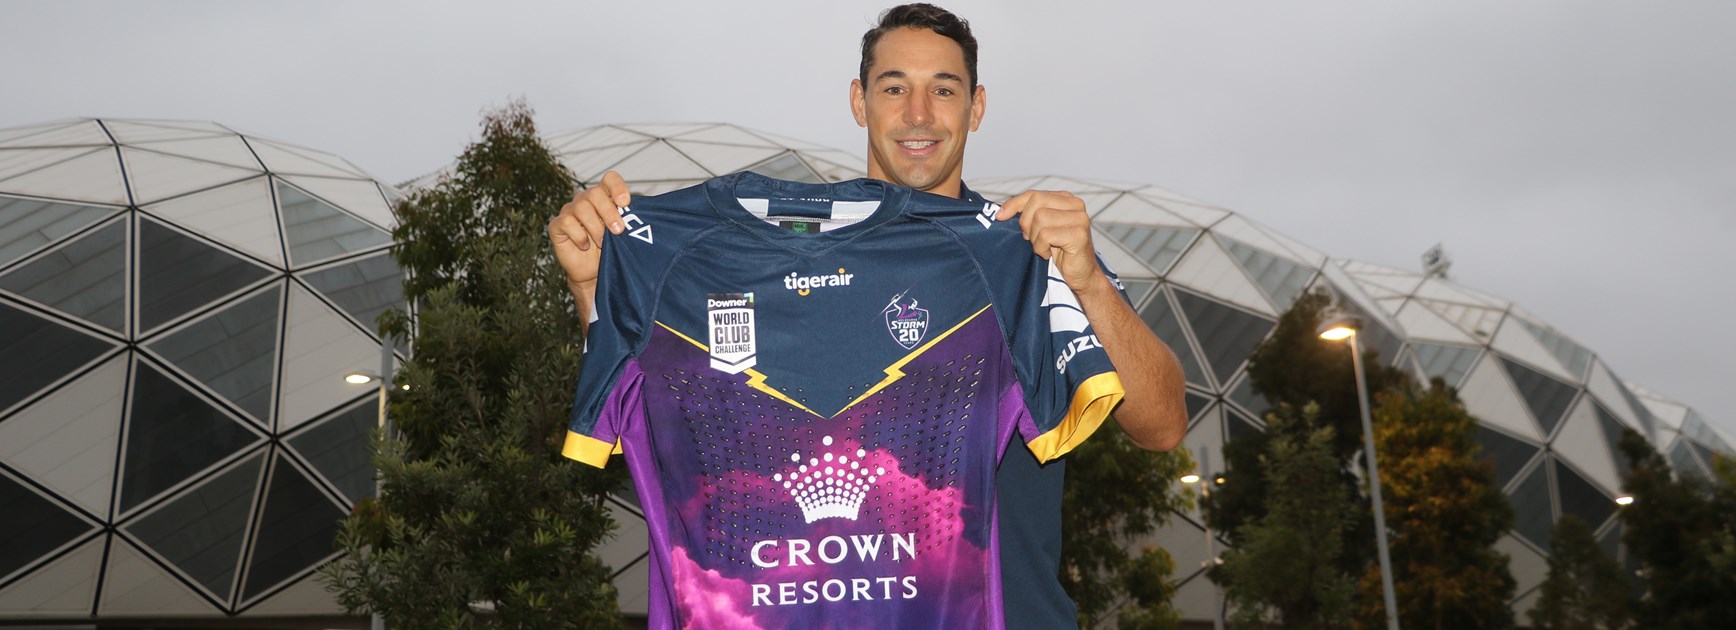 Downer partners with World Club Challenge